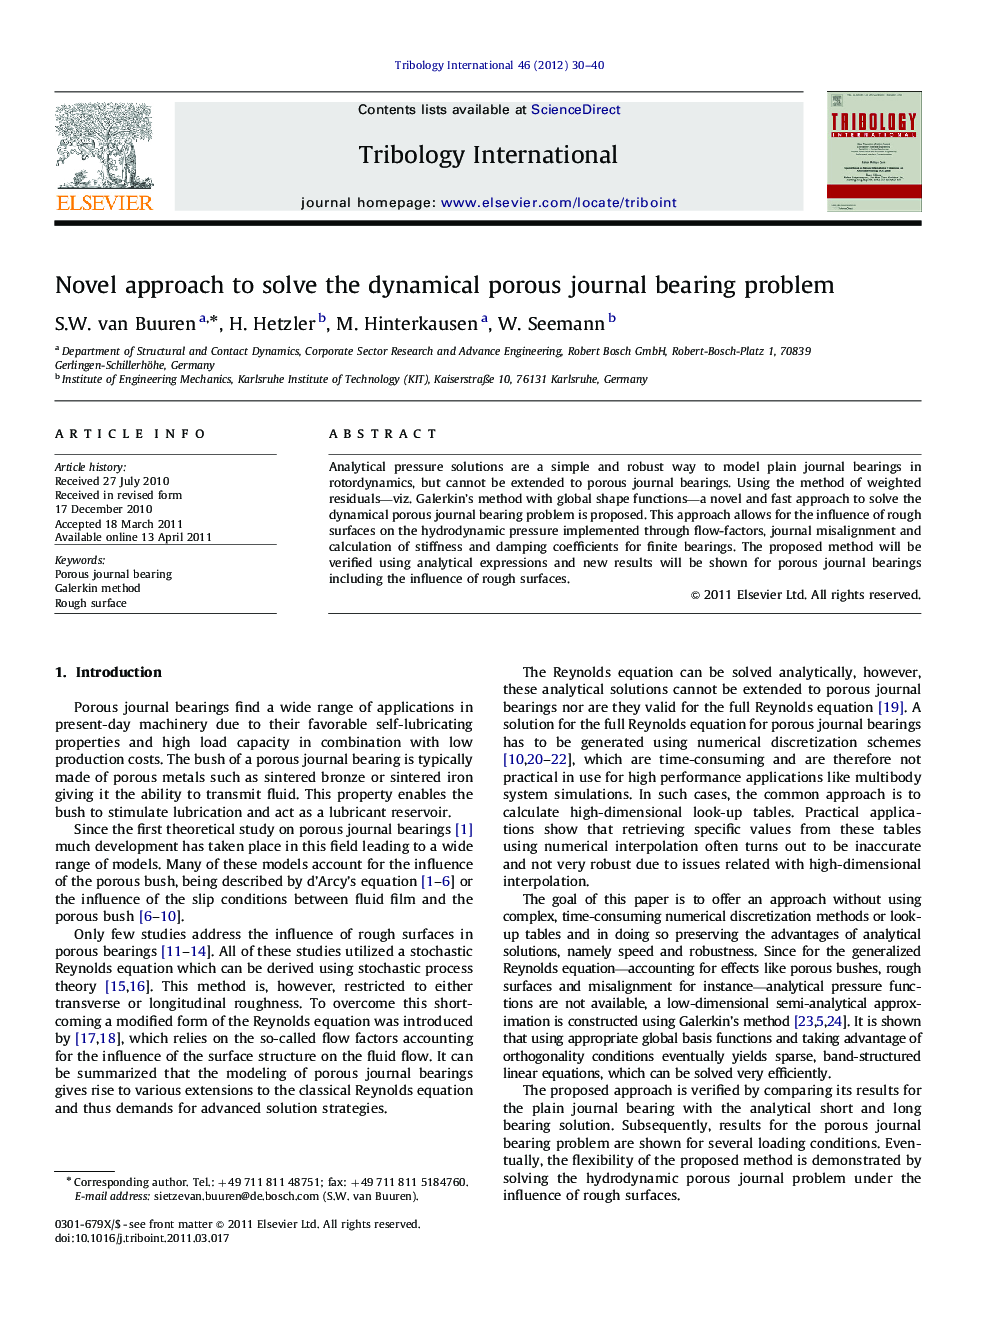 Novel approach to solve the dynamical porous journal bearing problem